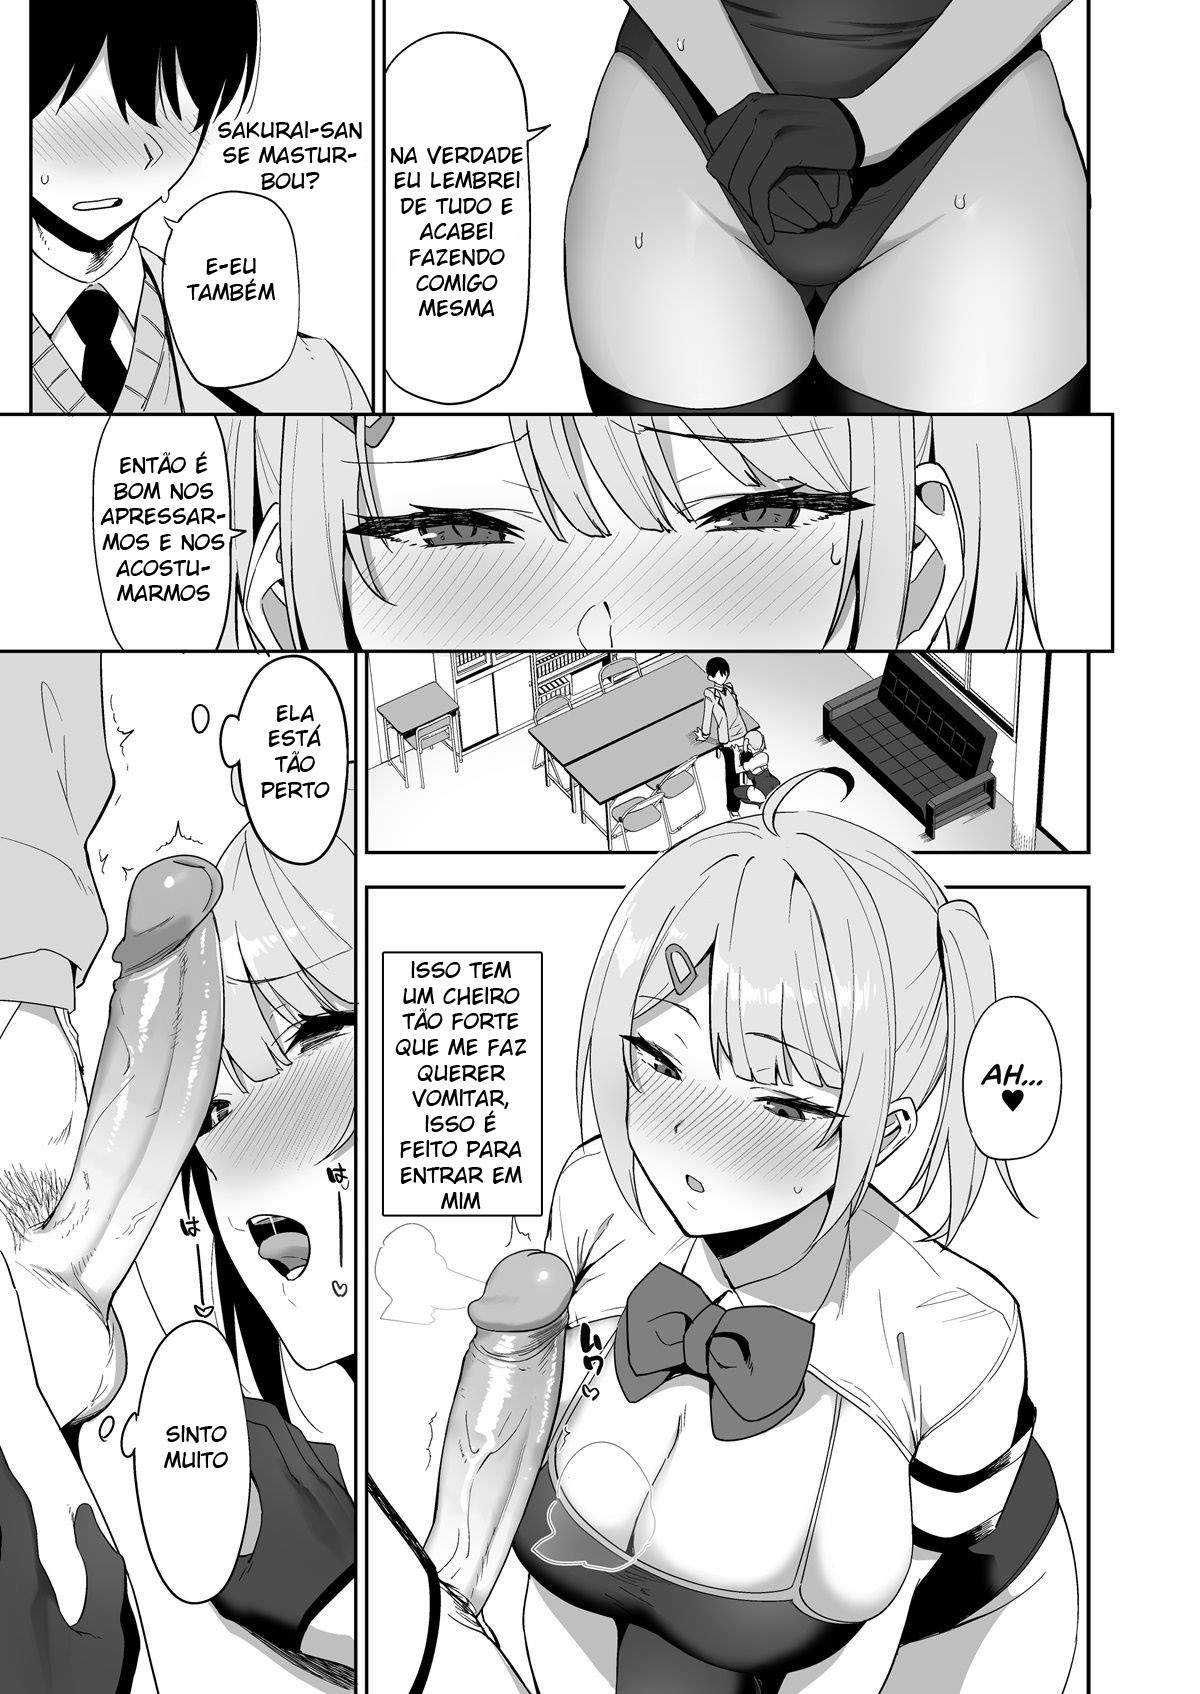 SEX ACTS With a Member Of The Public Moral Committee  Hentai pt-br 21